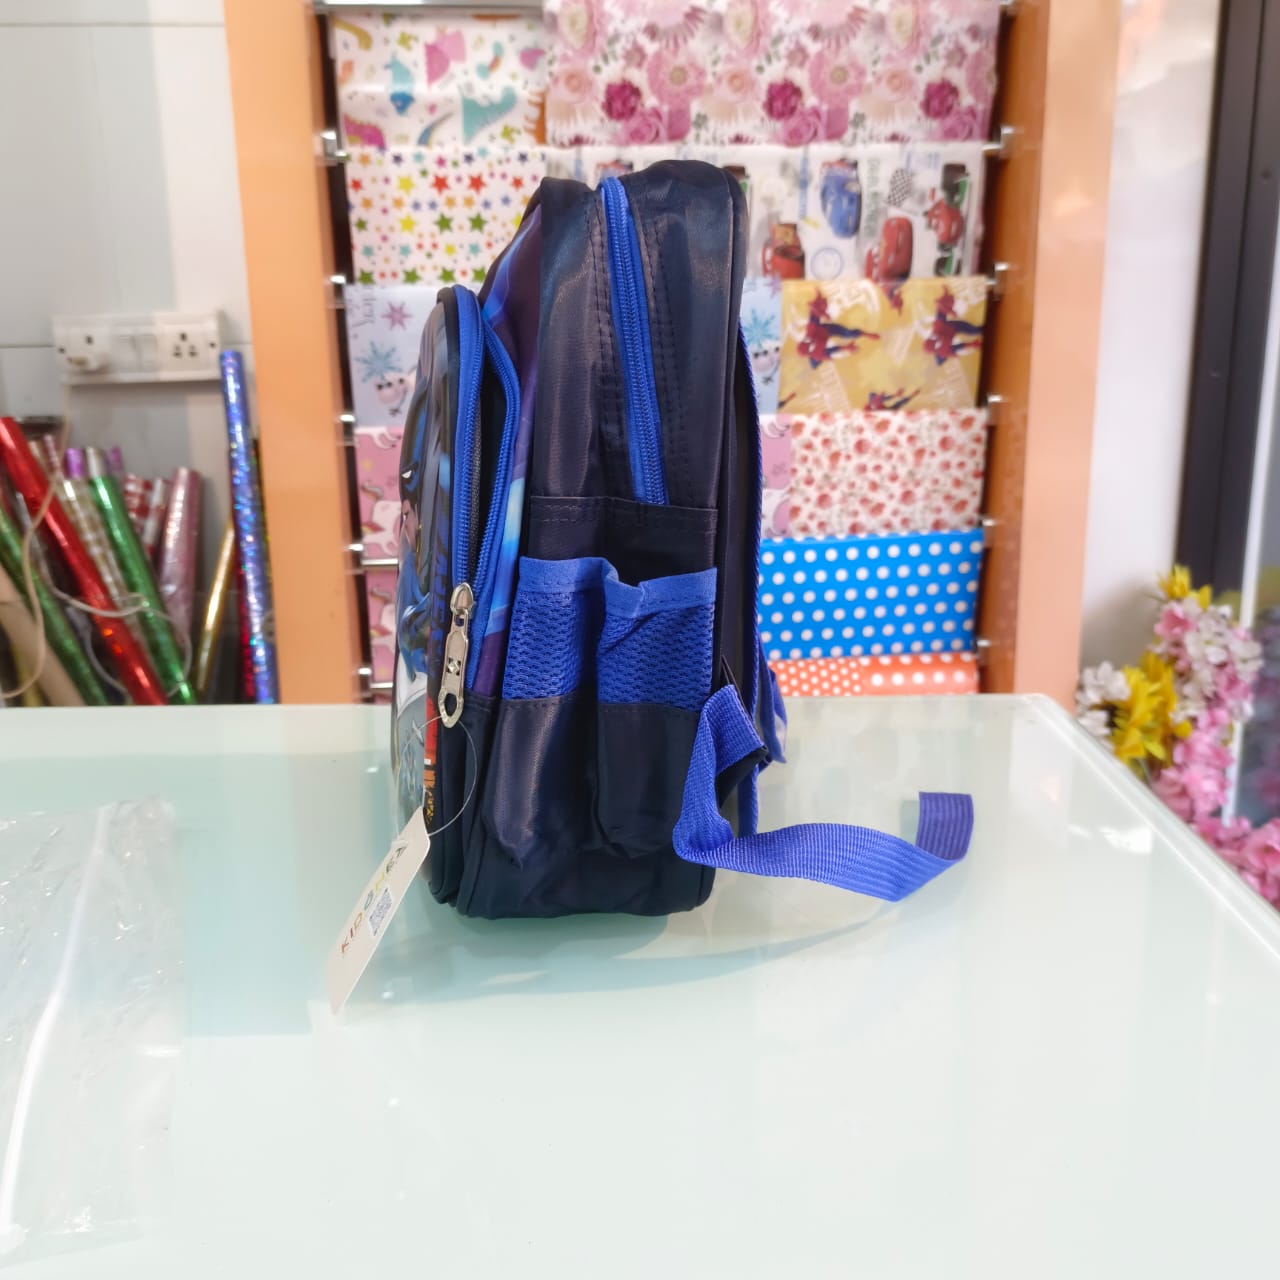 School Backpack for Kids Waterproof Unicon School Bag for Boys&girls Large Capacity Kids School Backpacks for Picnic, Tuition, Travel, Camping, Burden-relief Bag for Kids